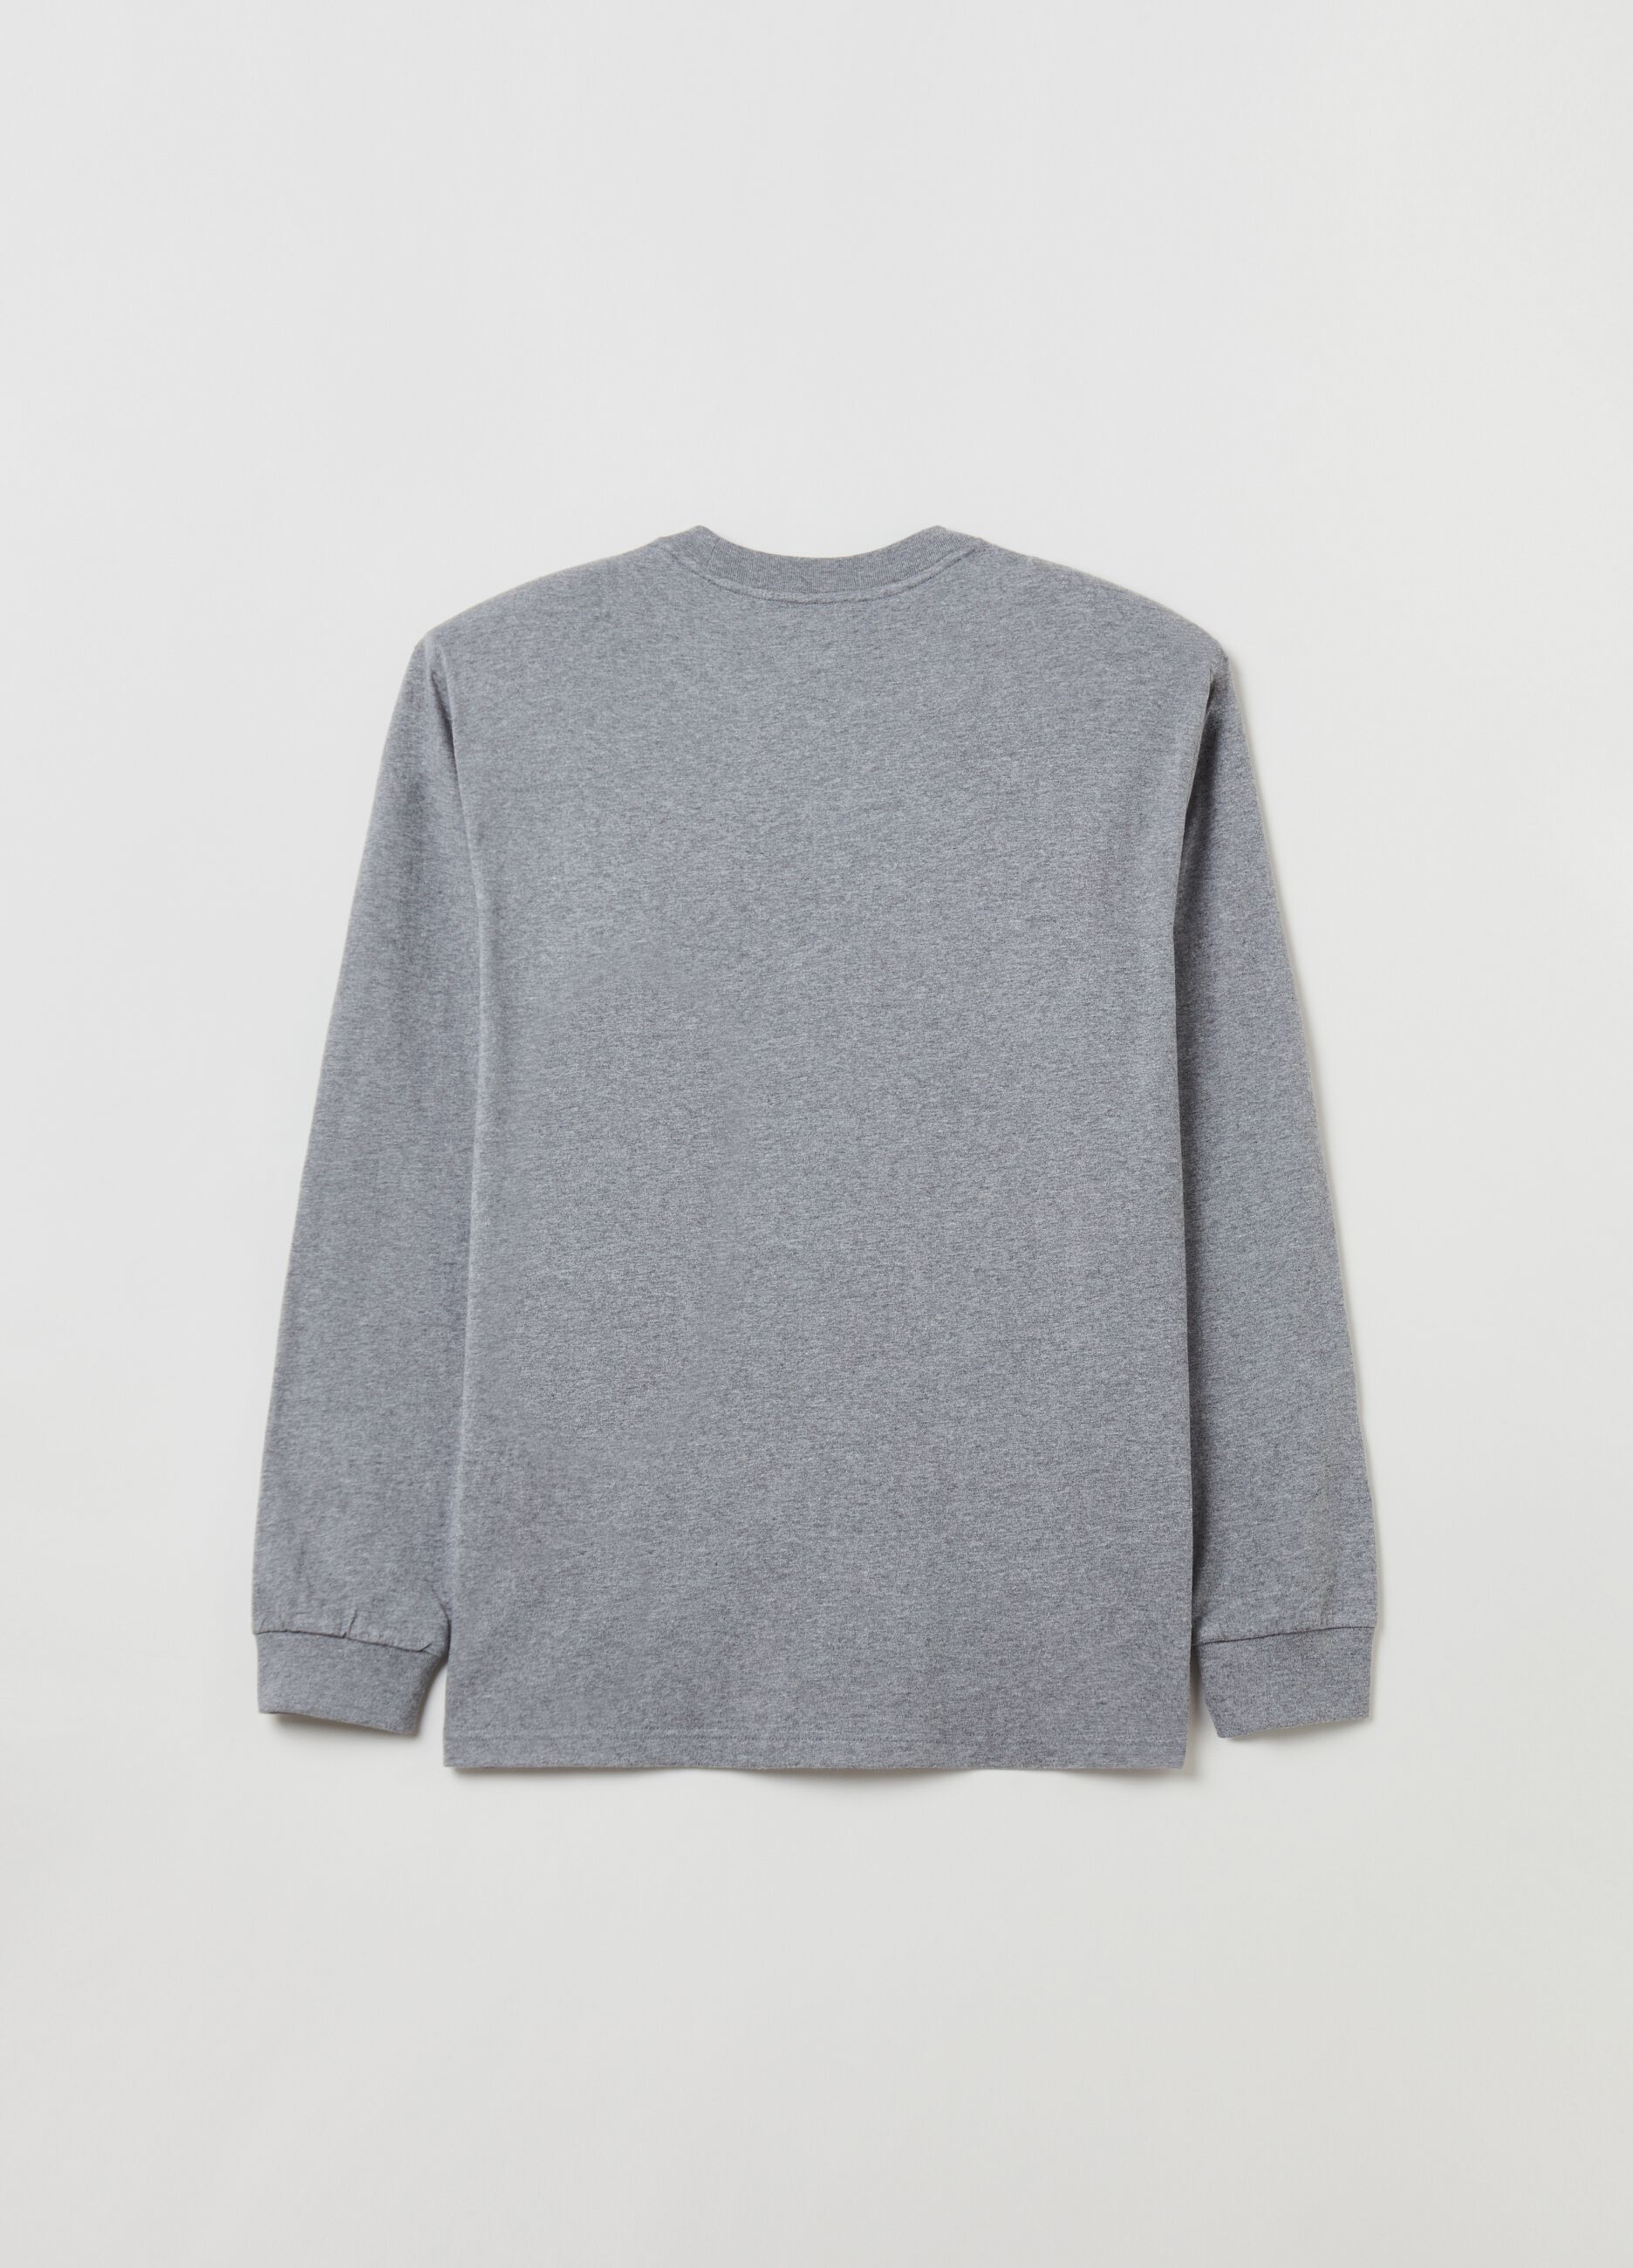 Long-sleeved T-shirt in organic cotton.